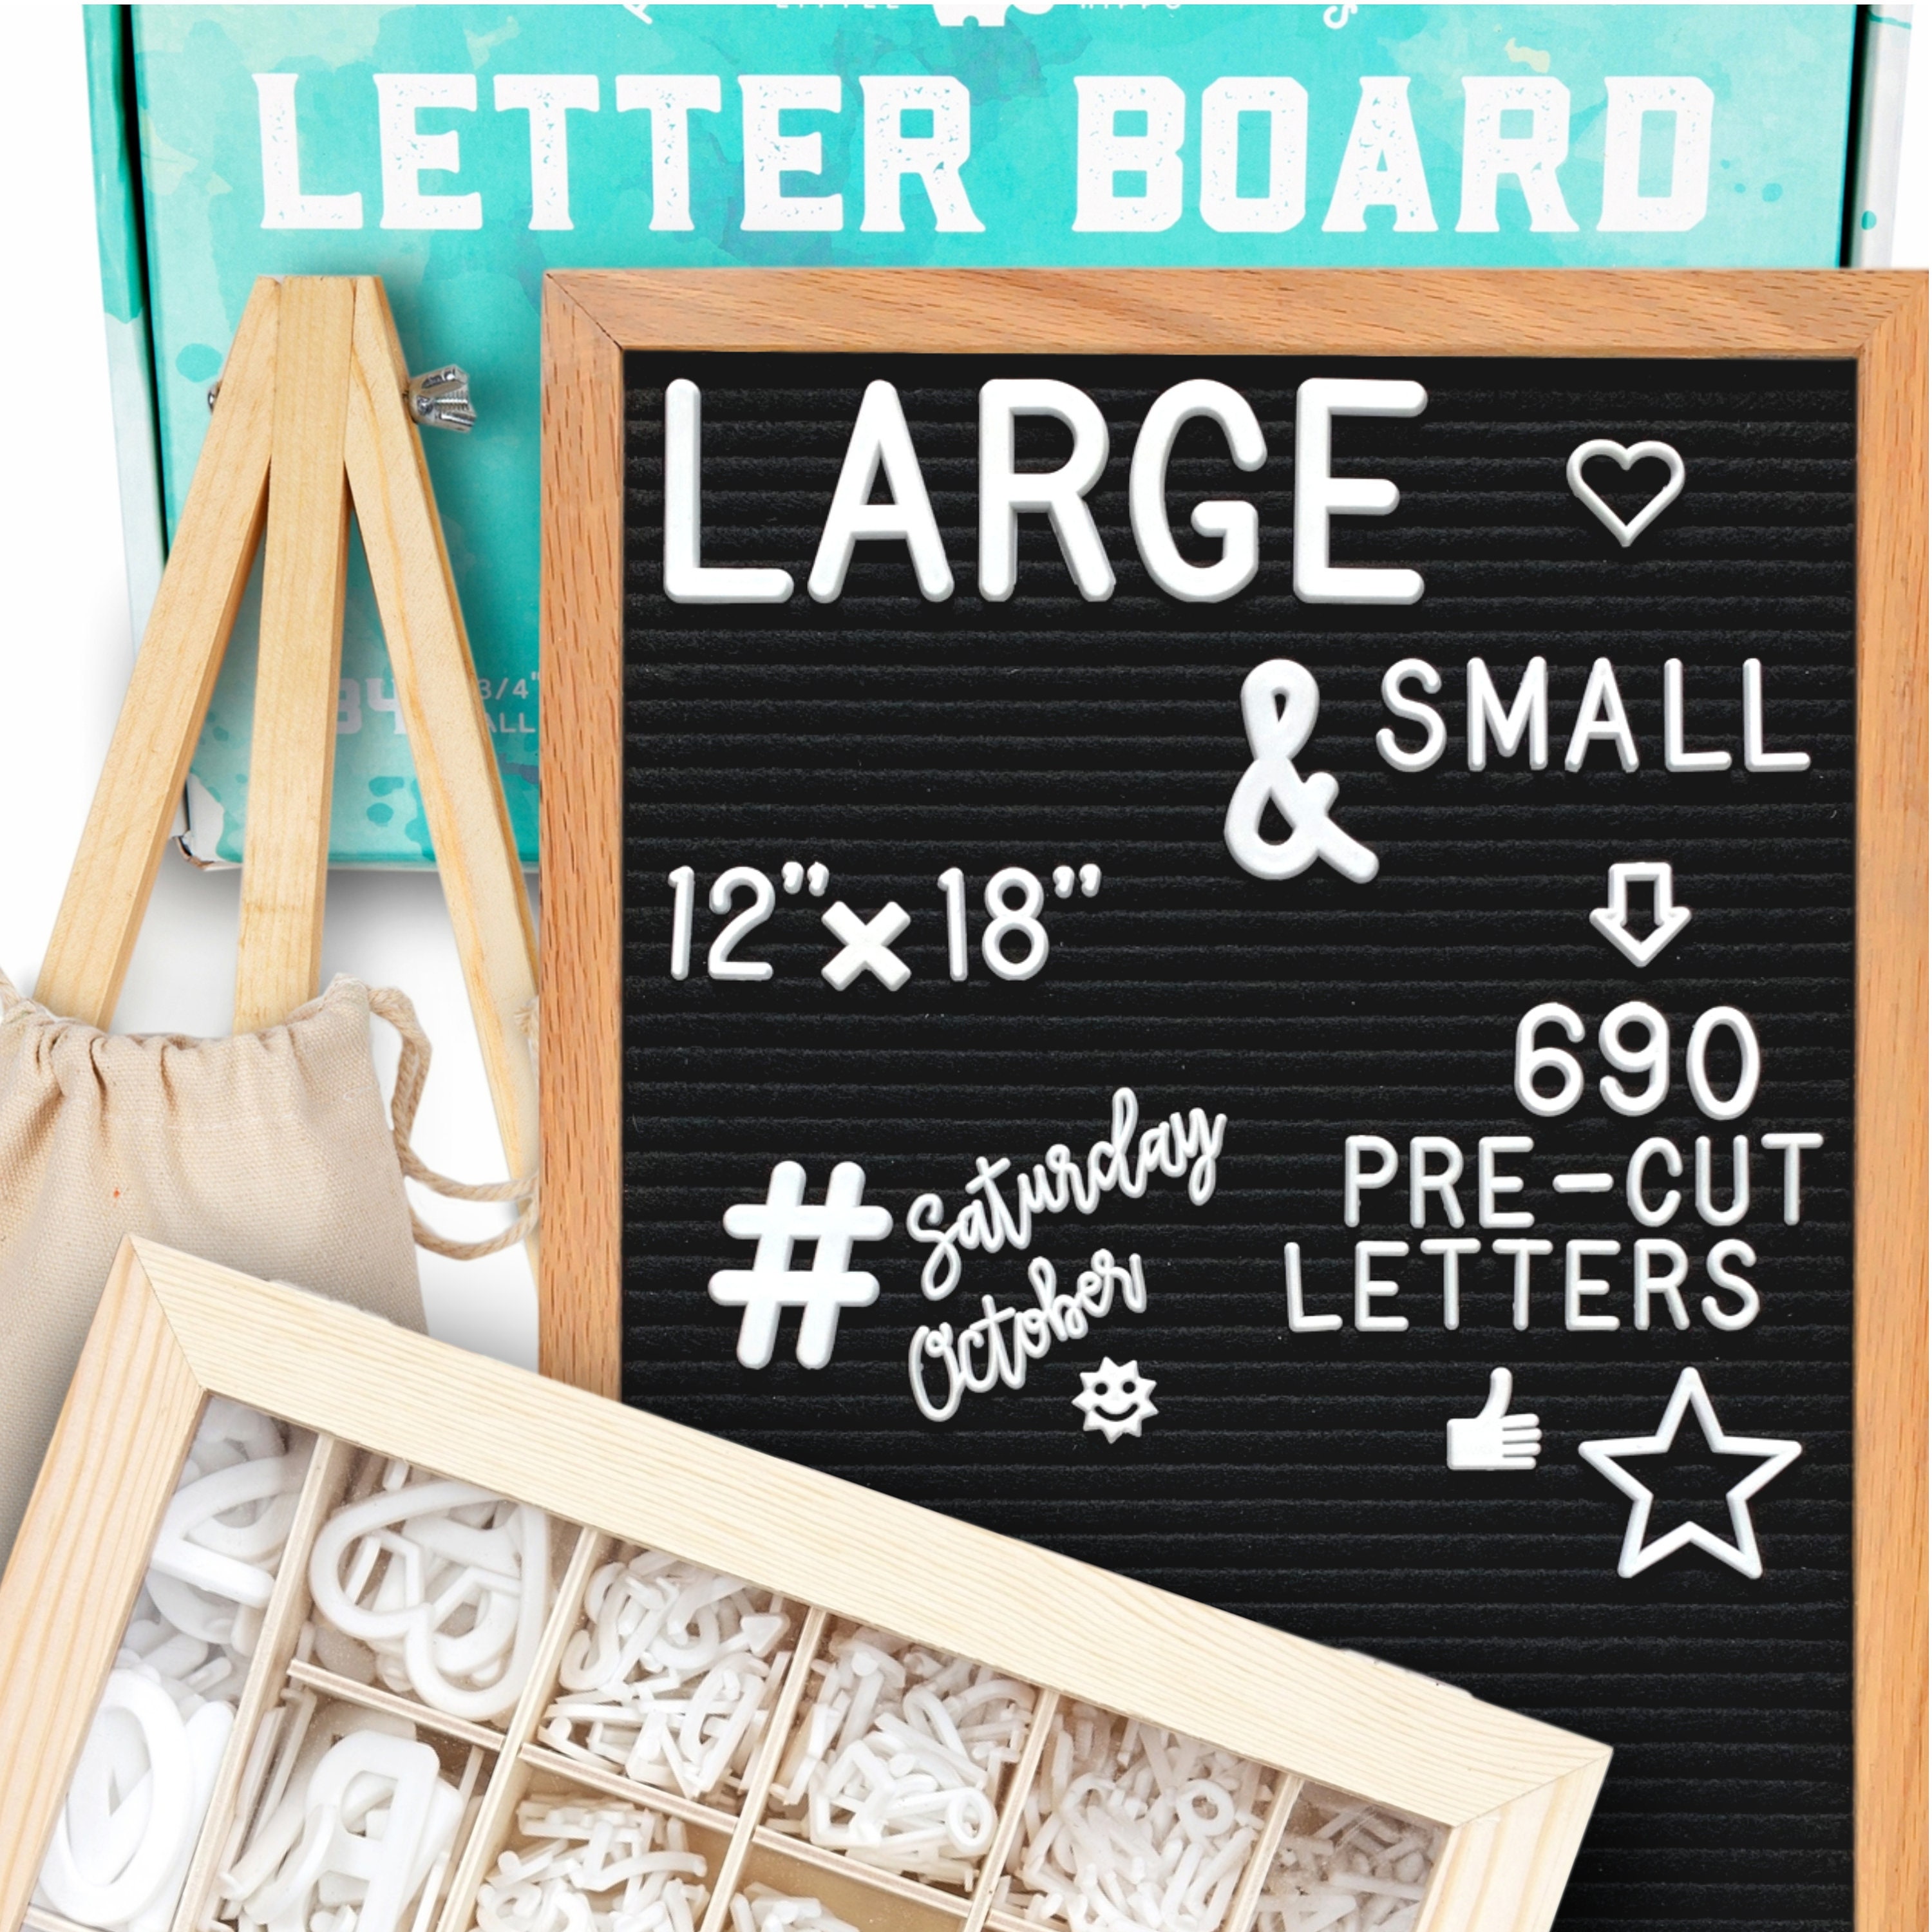 Black Letters Numbers 525 Precut White 10x10 Farmhouse Antique Vintage Frame Changeable Message Gold Gray Felt Stand Sorting Tray Rustic Brown Wood Emojis Cotton Bag JL Brands Letter Board 